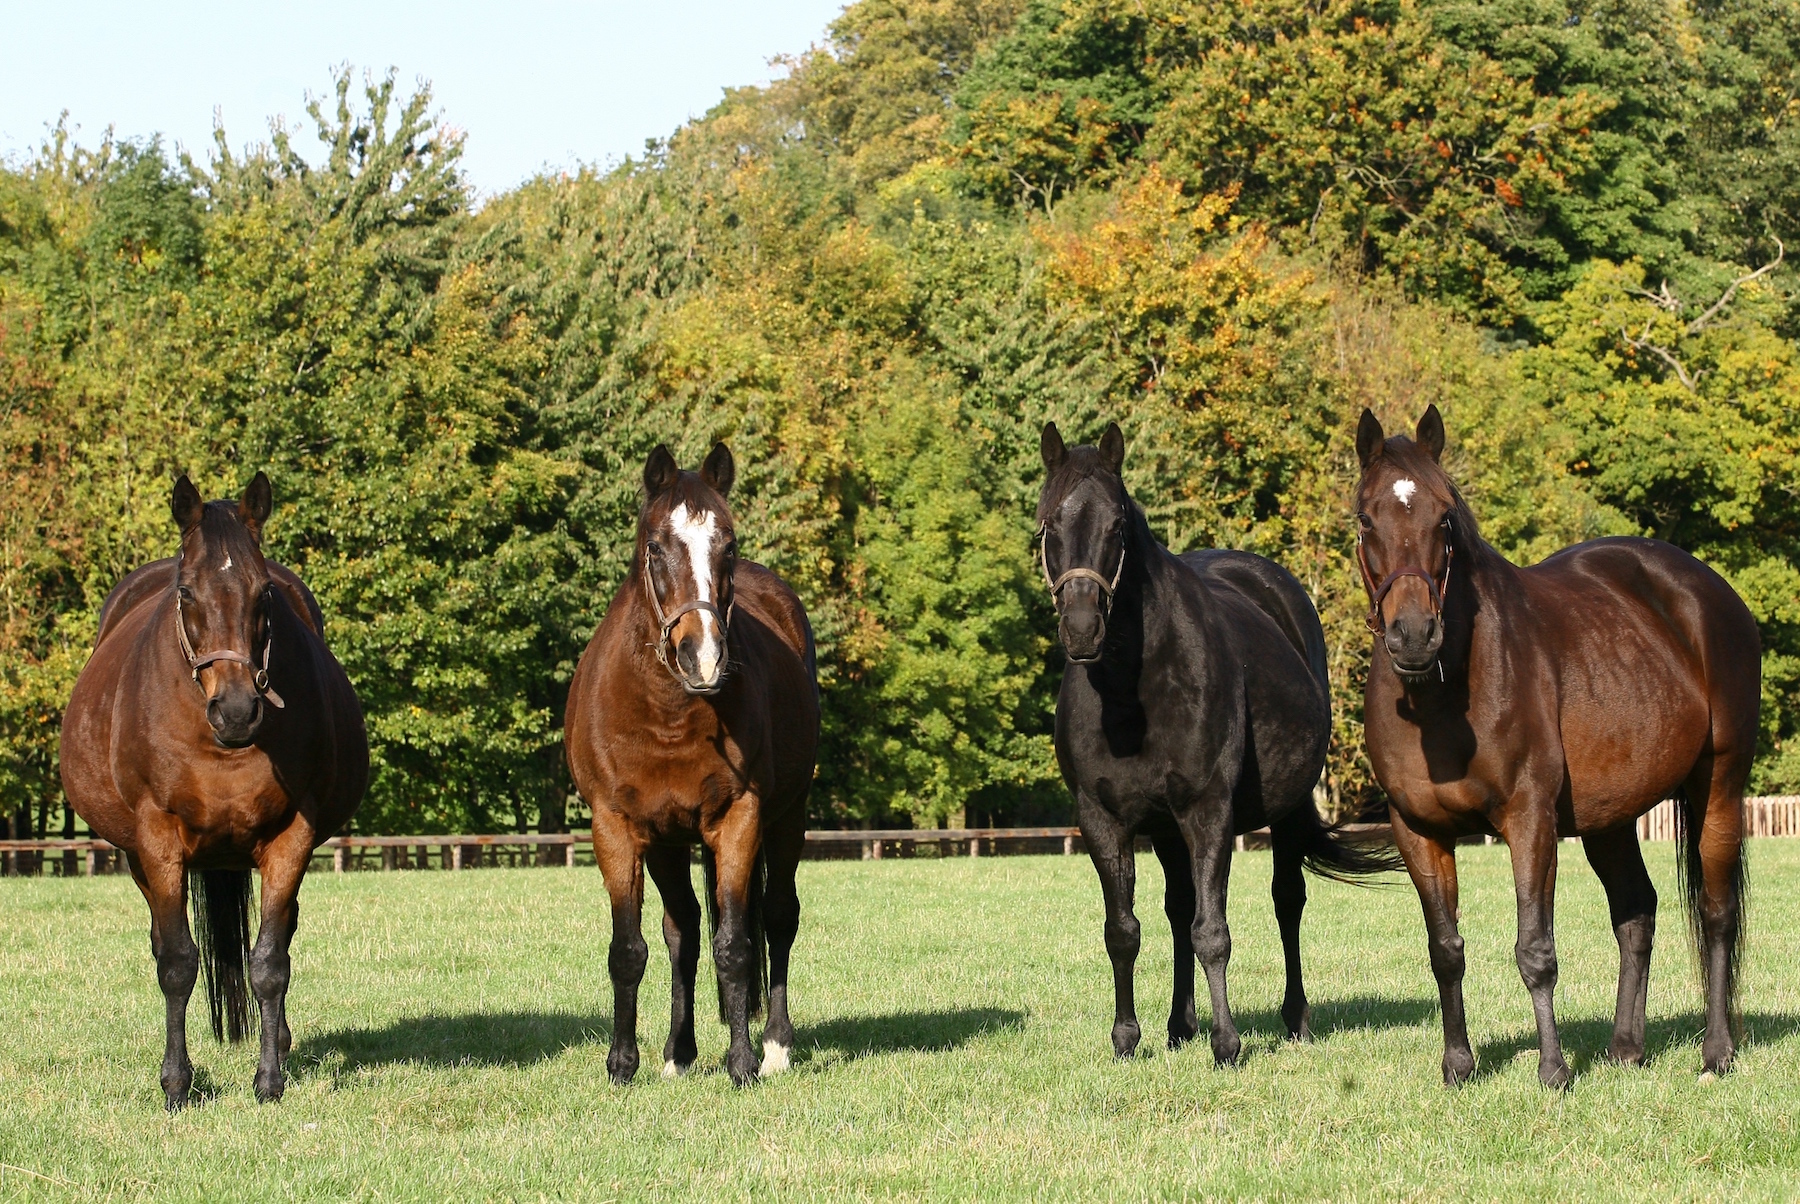 Family extraordinaire: Prince Khalid’s most celebrated foundation mare, Hasili (second left), with three of her daughters - G1 winners all - who are now also successful Juddmonte broodmares: Banks Hill (left), Heat Haze and Intercontinental (right). Photo: Juddmonte Farms